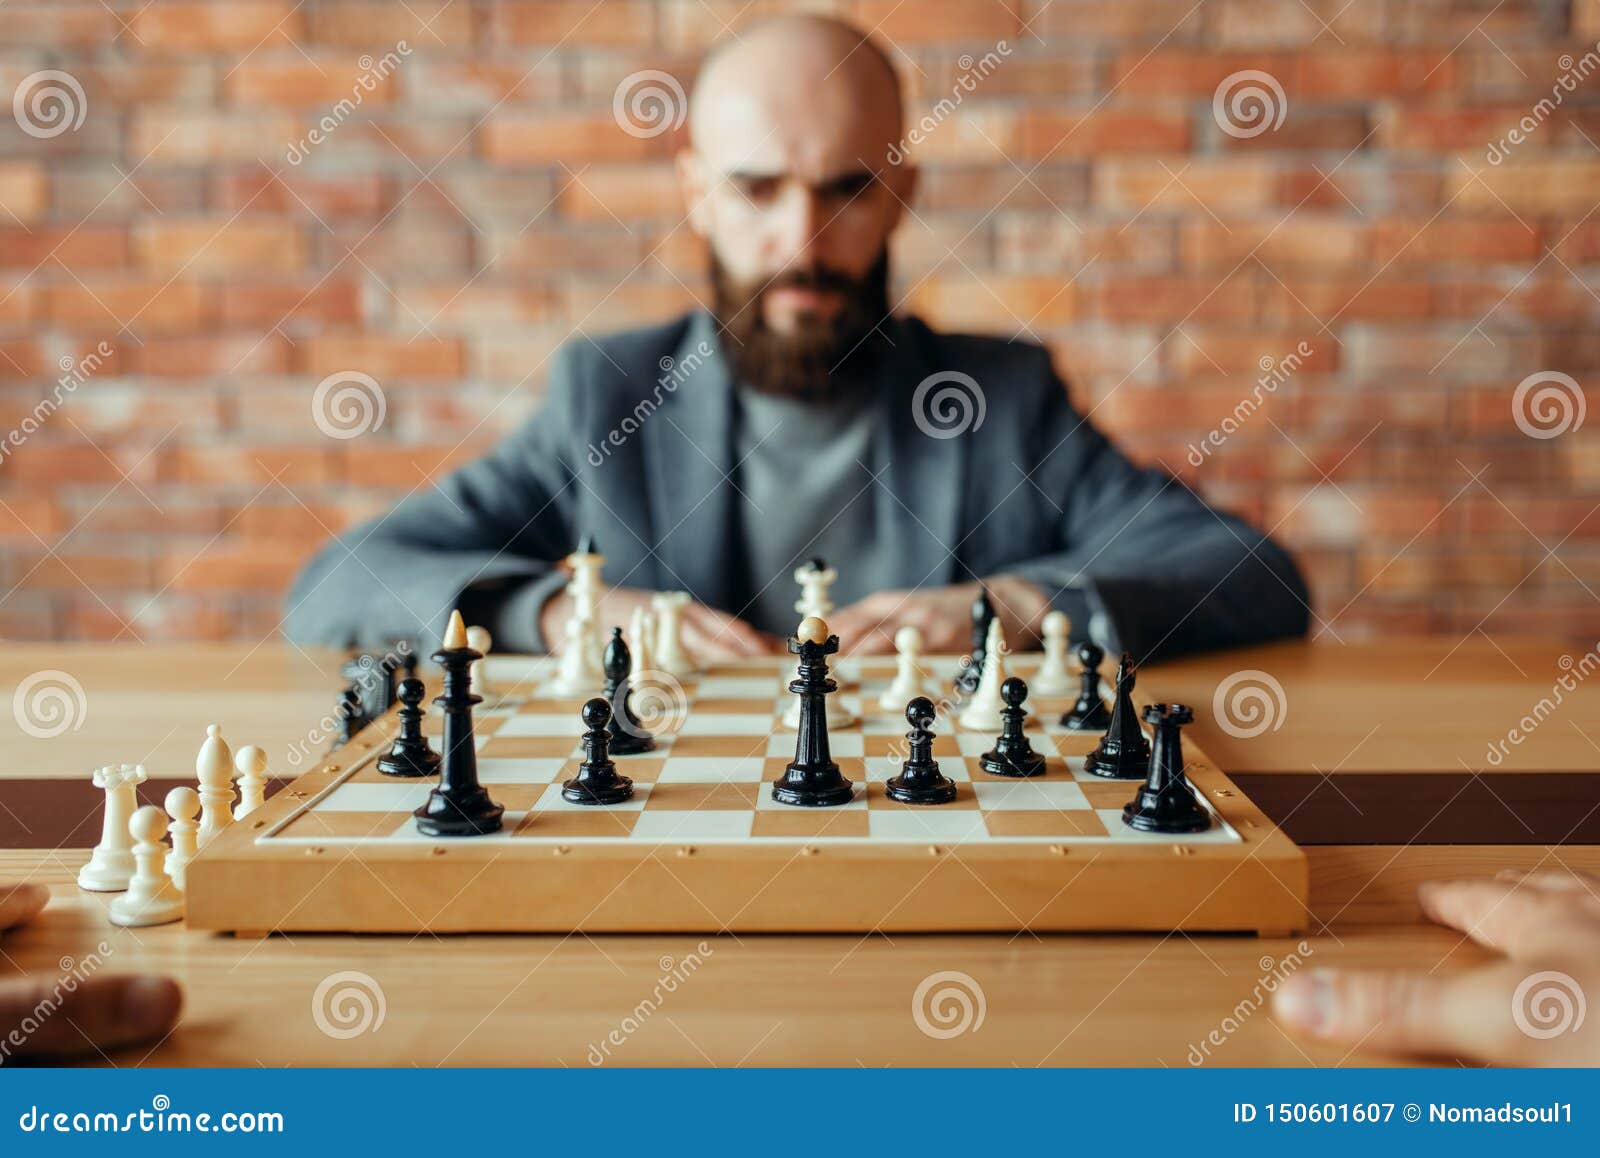 Man playing chess. Play with God or with yourself. Concept - strategy  goals, efforts, plans. Stock Photo